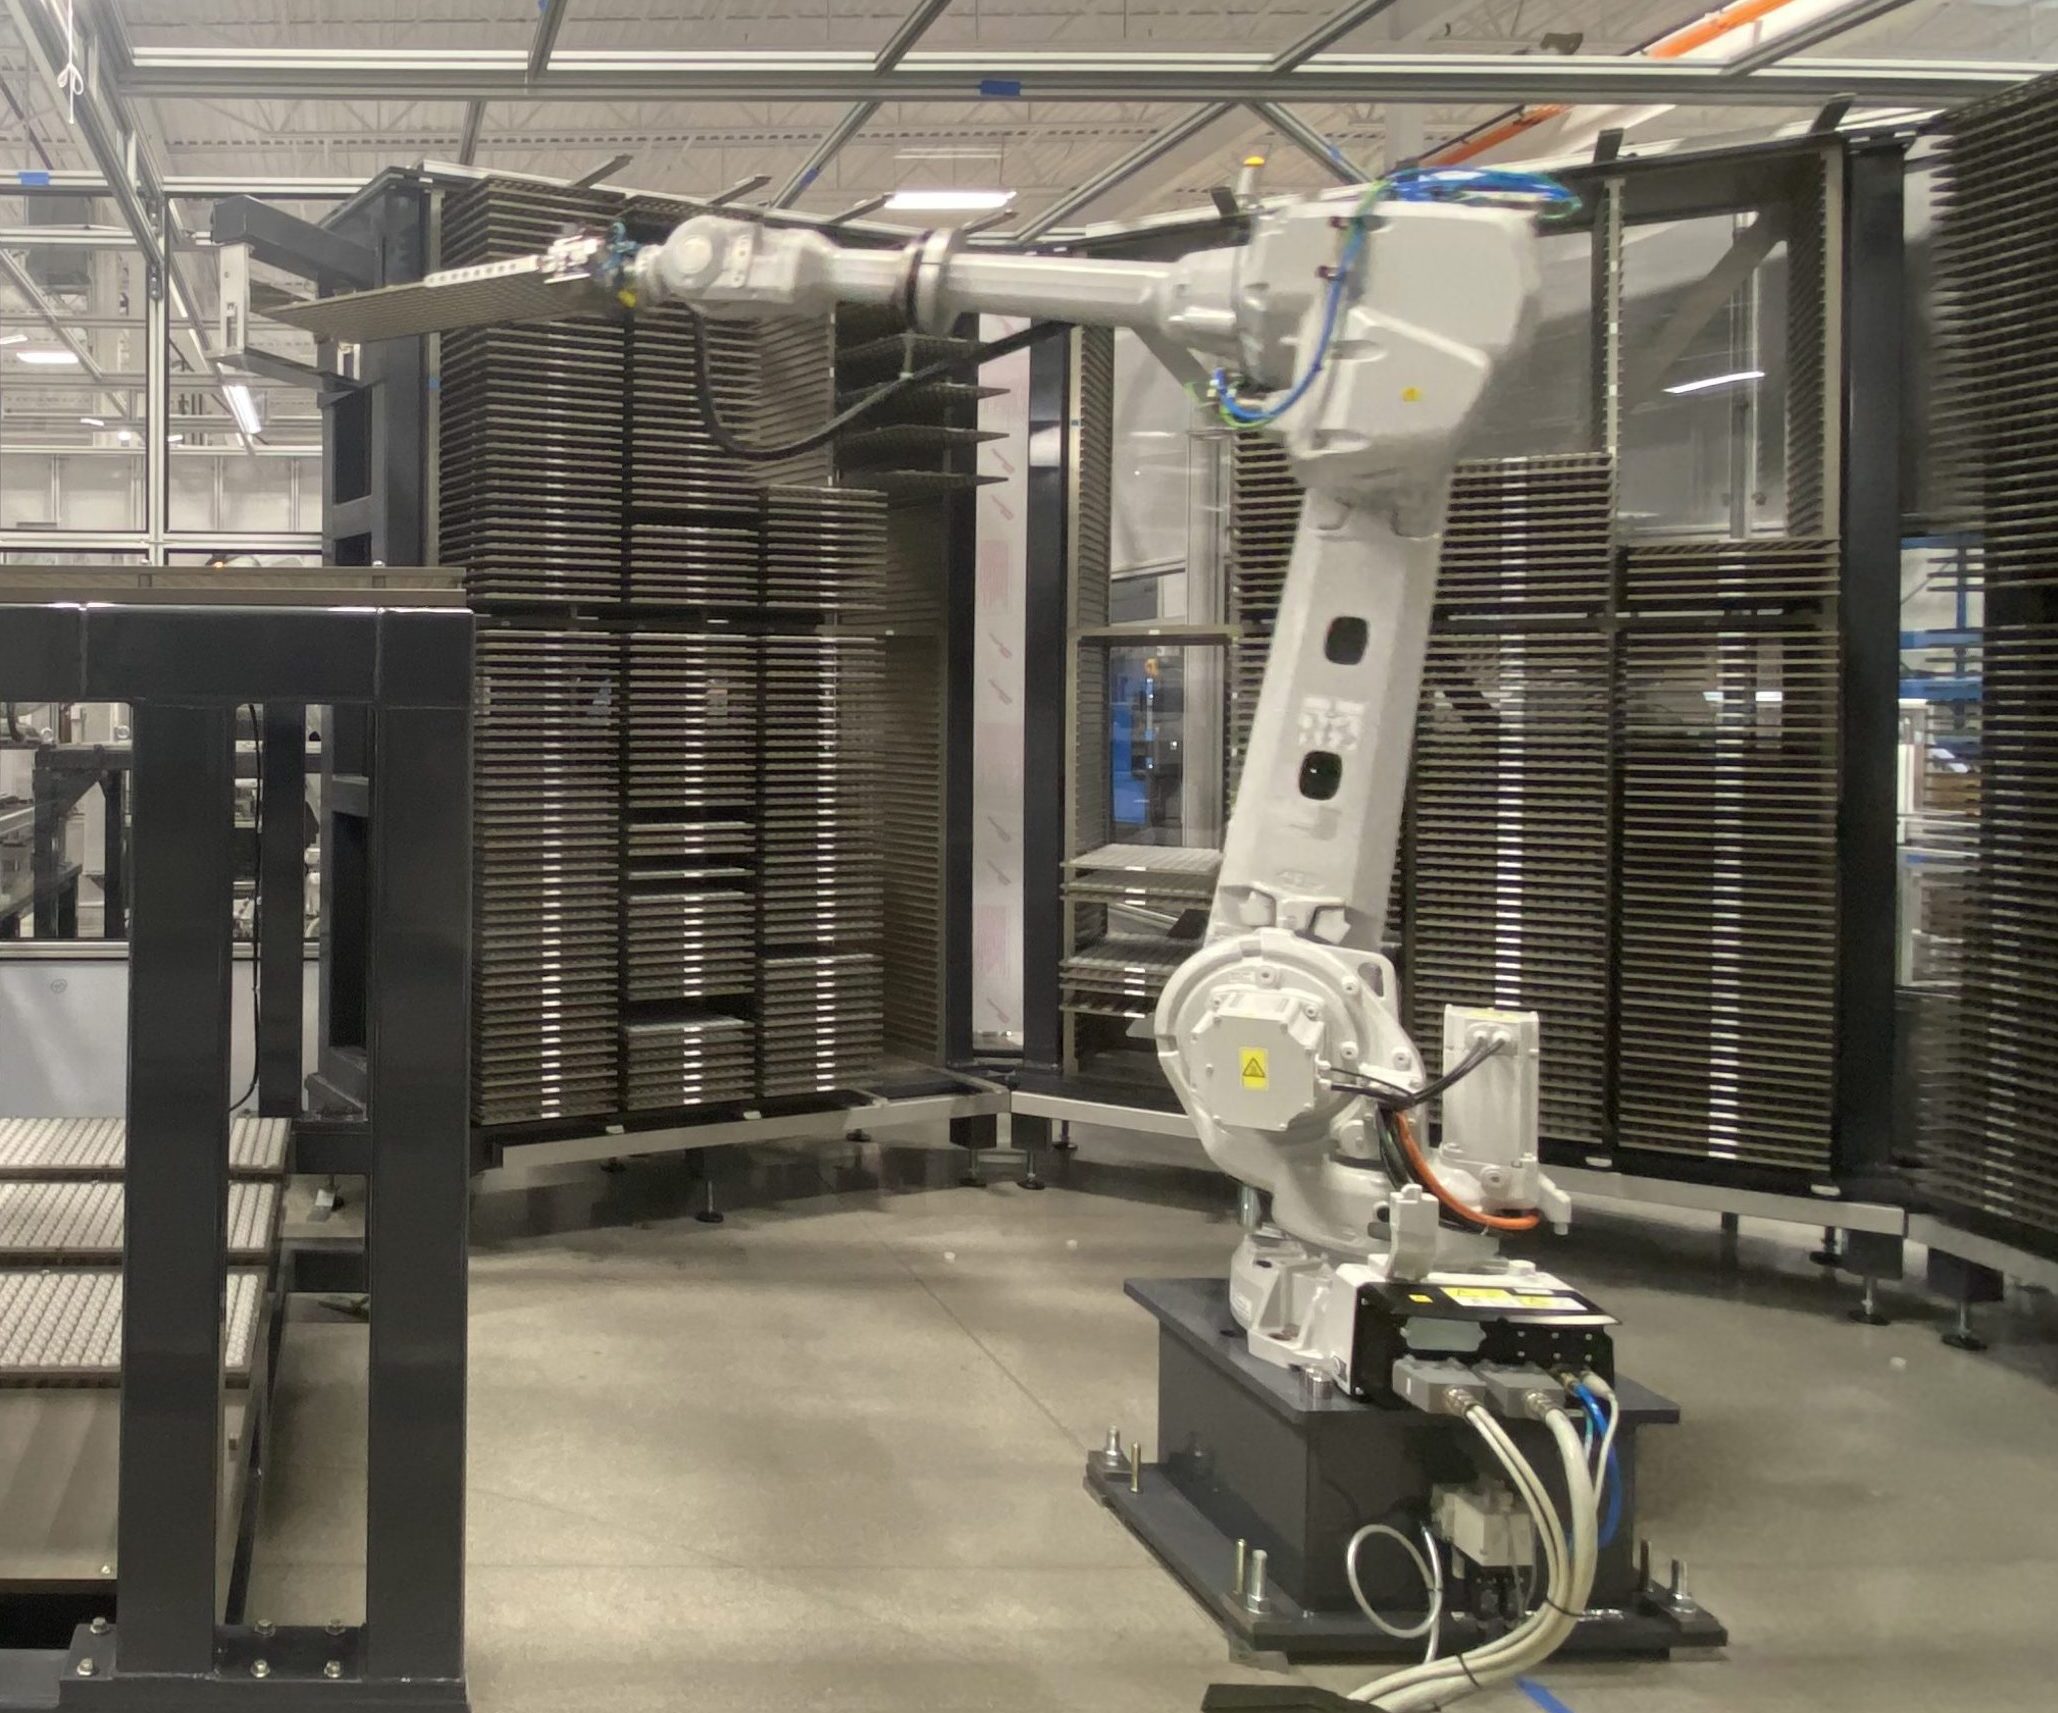 Robot used to move trays of components